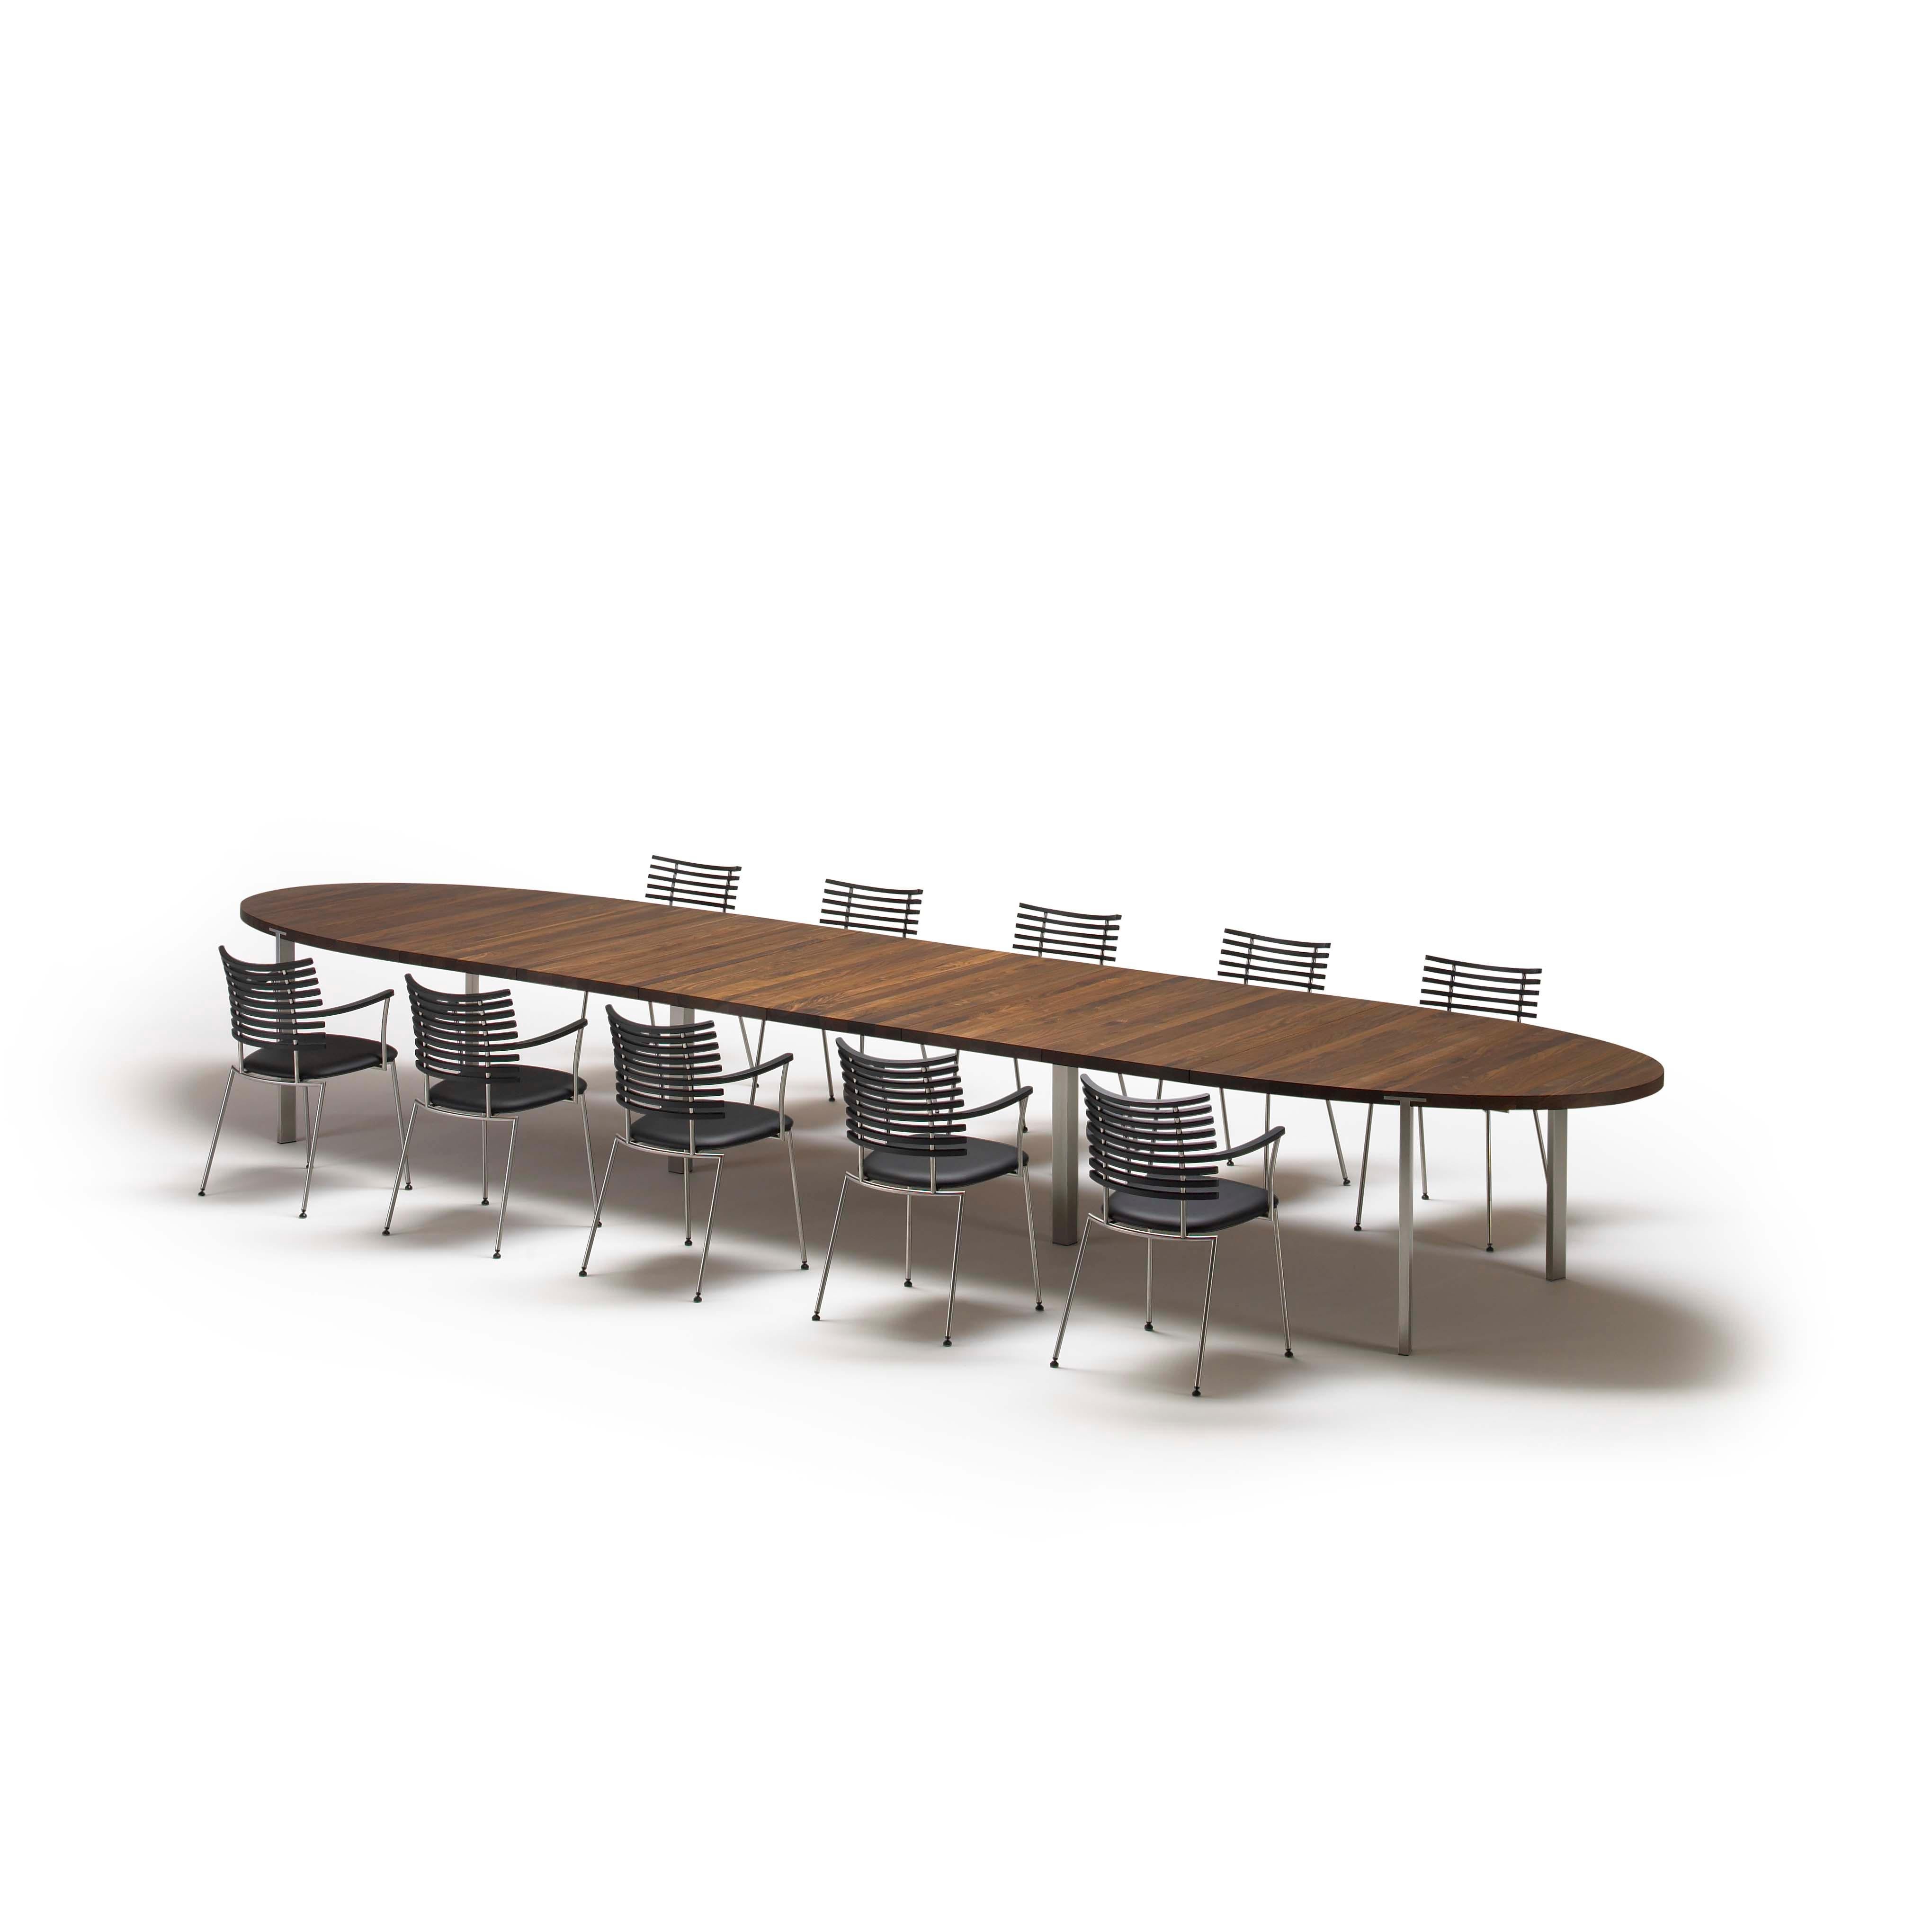 Stainless Steel Gm2152 Oval Table, Oak Oiled - Design by Nissen & Gehl Mdd For Sale